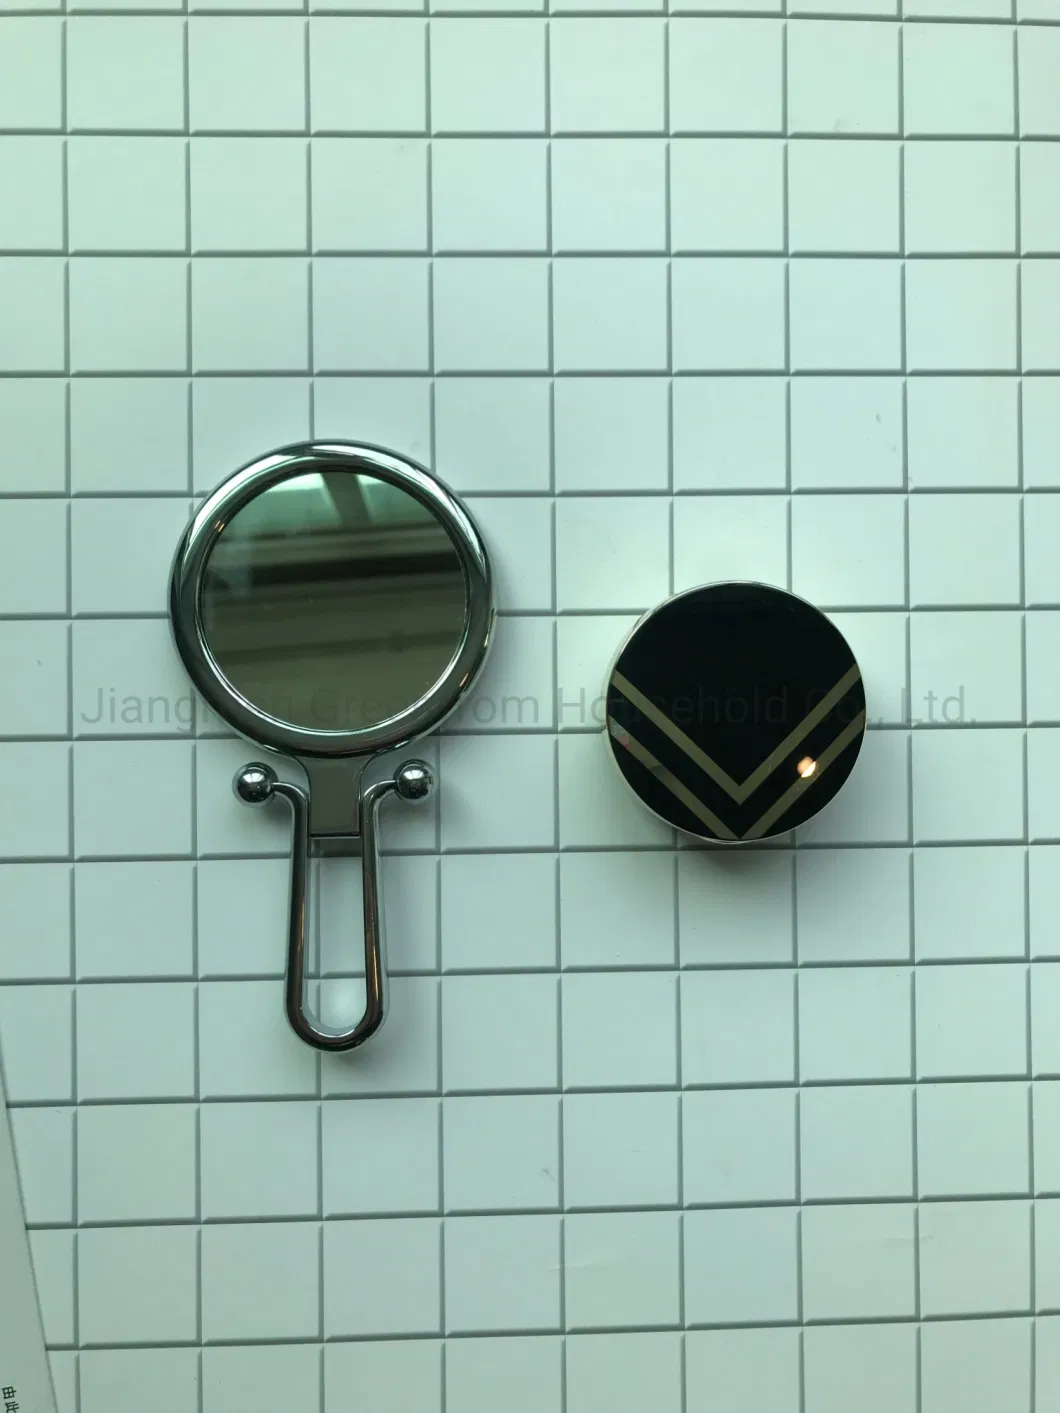 3 Inch Small Size Vanity Compact Mirror